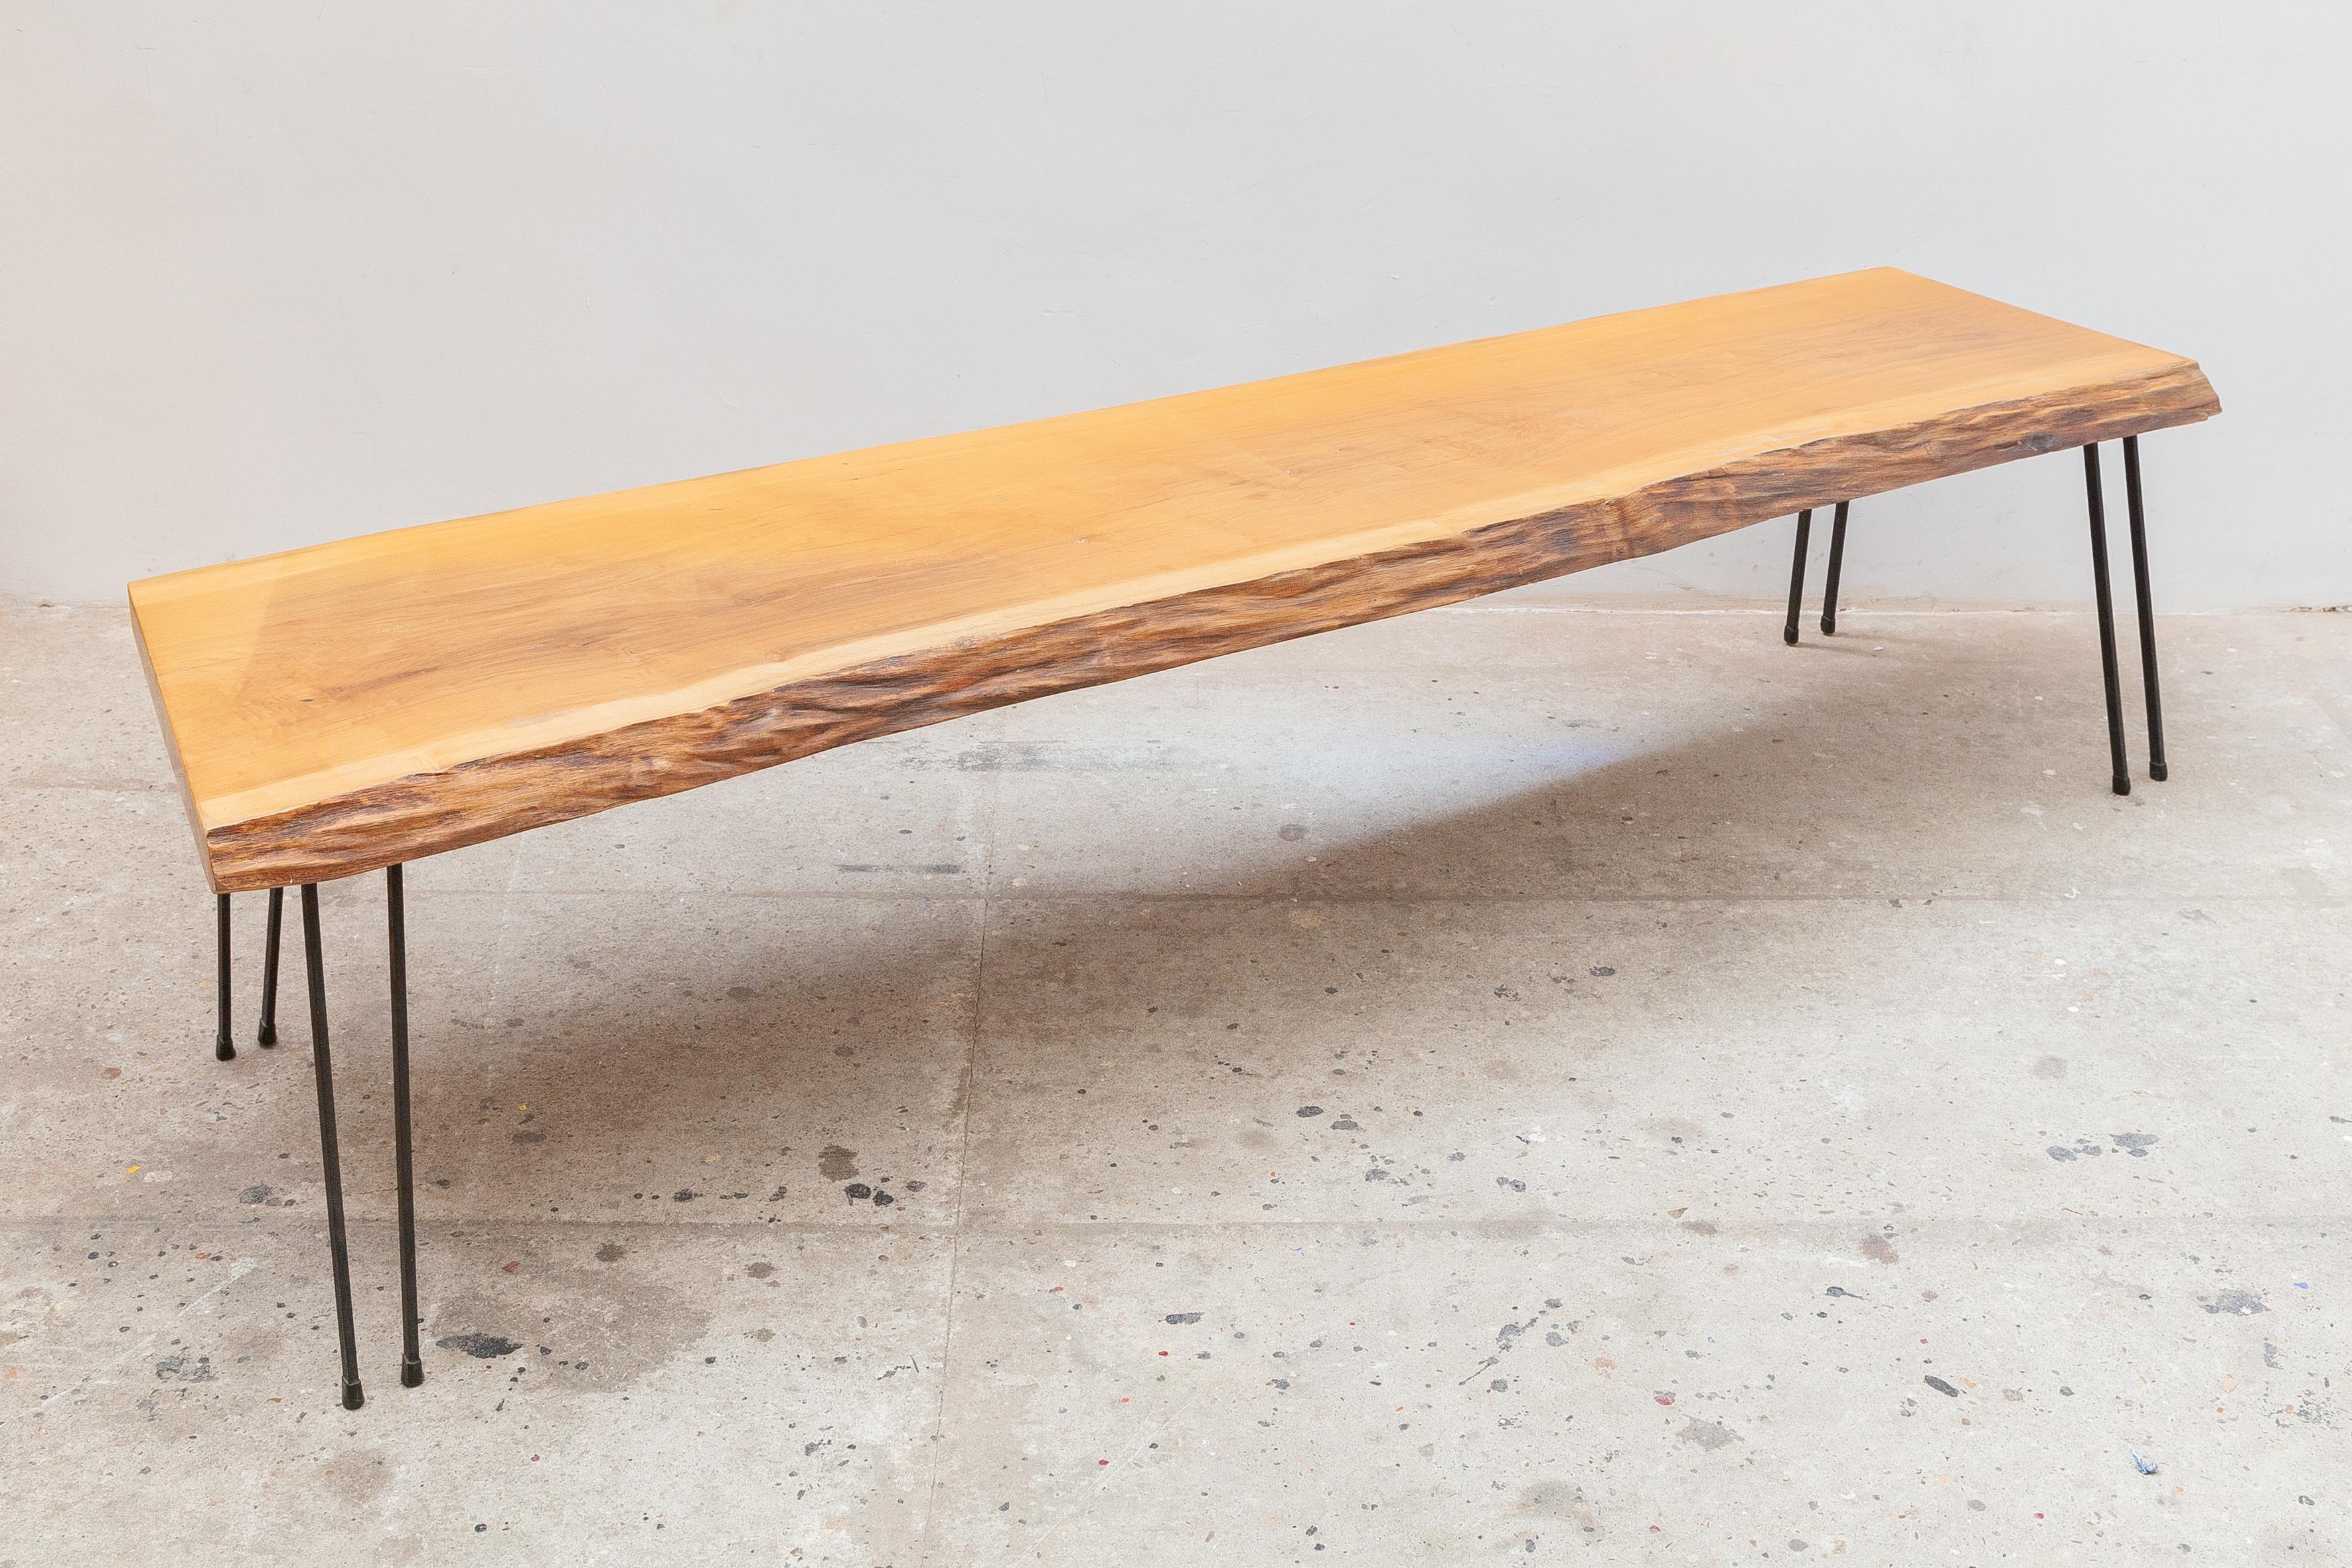 Mid-Century Modern solid slab coffee table or Bench on 8 forged legs in the Style of George Nakashima 1960s. Beautiful part of a tree trunk rudimentary and great as decoration in a sustainable eco modern interior.